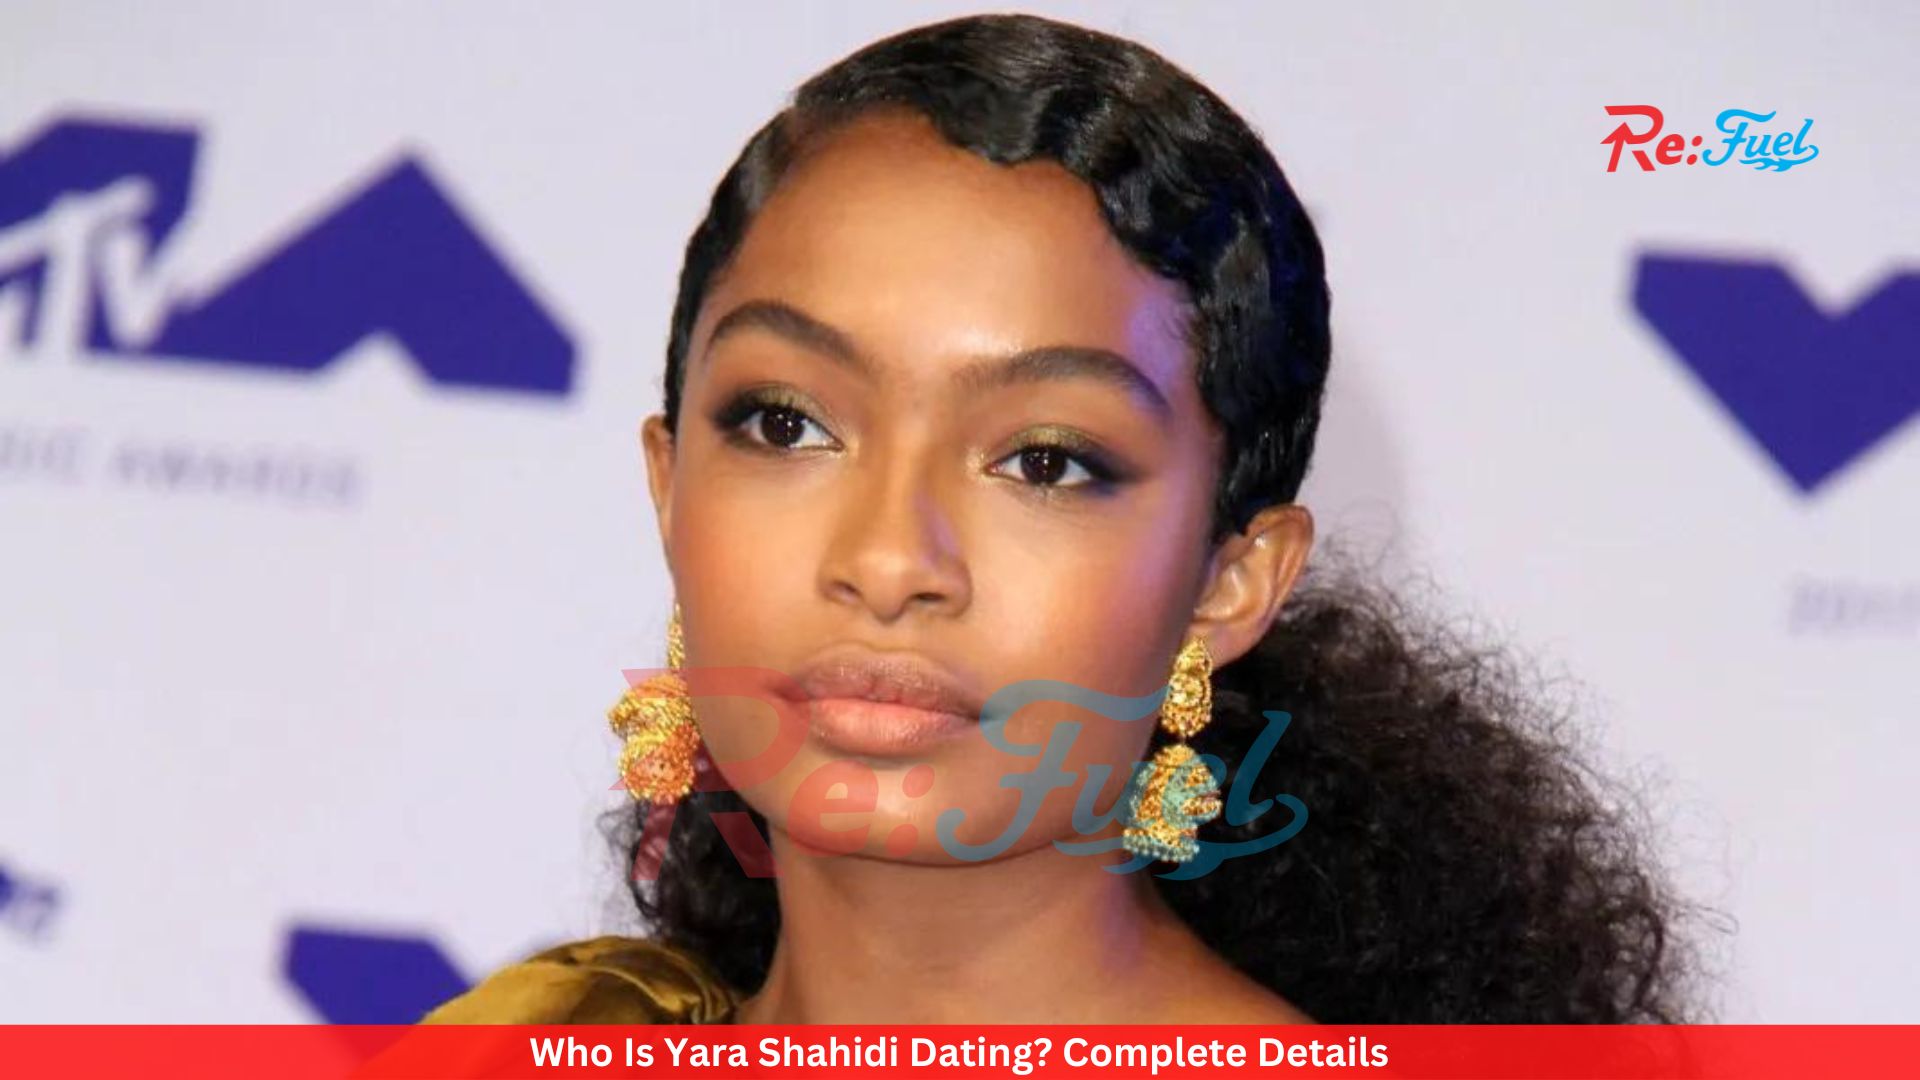 Who Is Yara Shahidi Dating? Complete Details